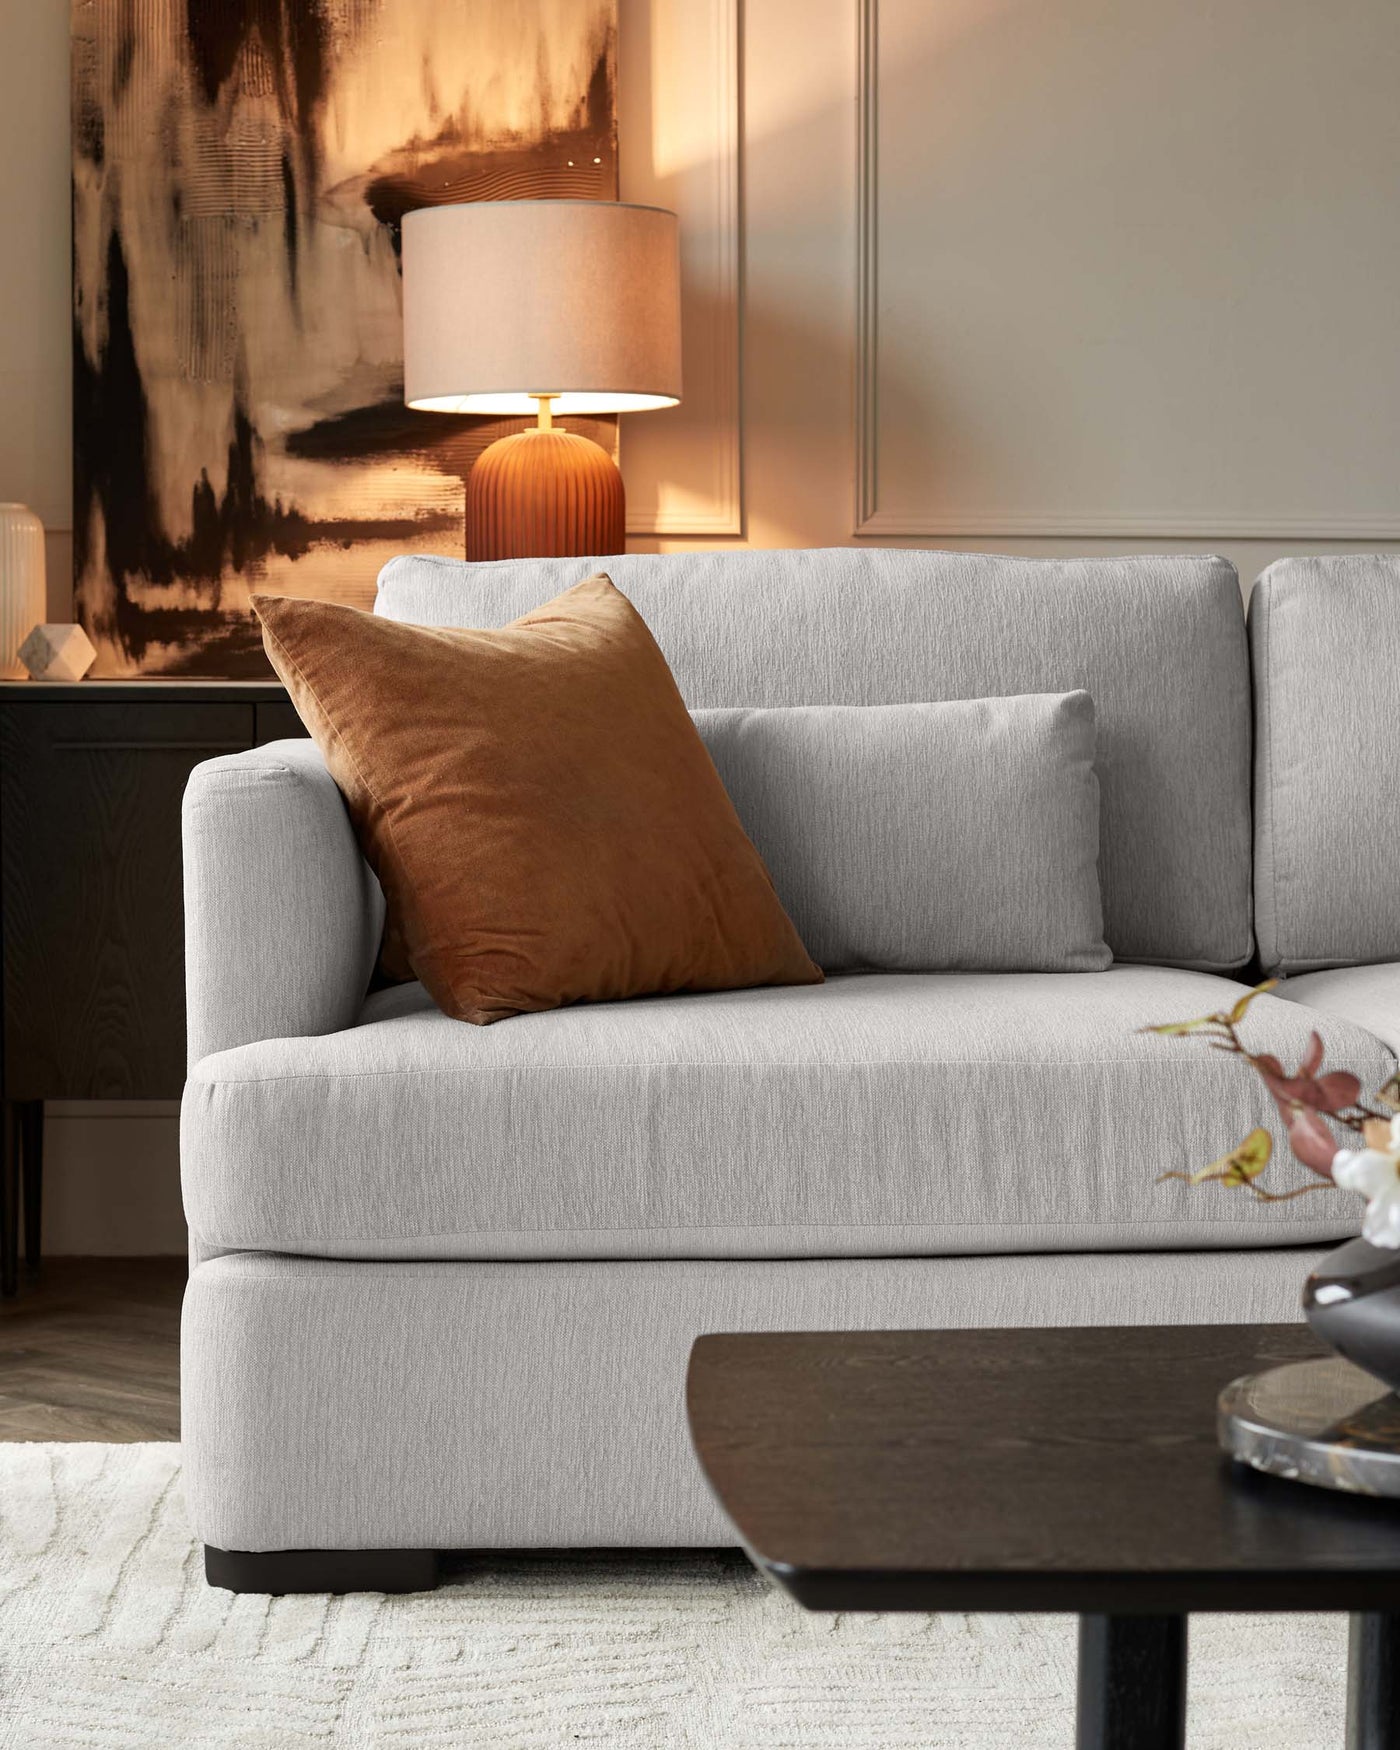 A contemporary light grey three-seater fabric sofa with clean lines, featuring plush back cushions and one brown decorative pillow. In front of the sofa is a small, dark wooden coffee table with rounded edges. To the left stands a modern side table with a unique ribbed base, upon which rests a stylish lamp with a beige shade. The room is accented with a textured white rug underneath.